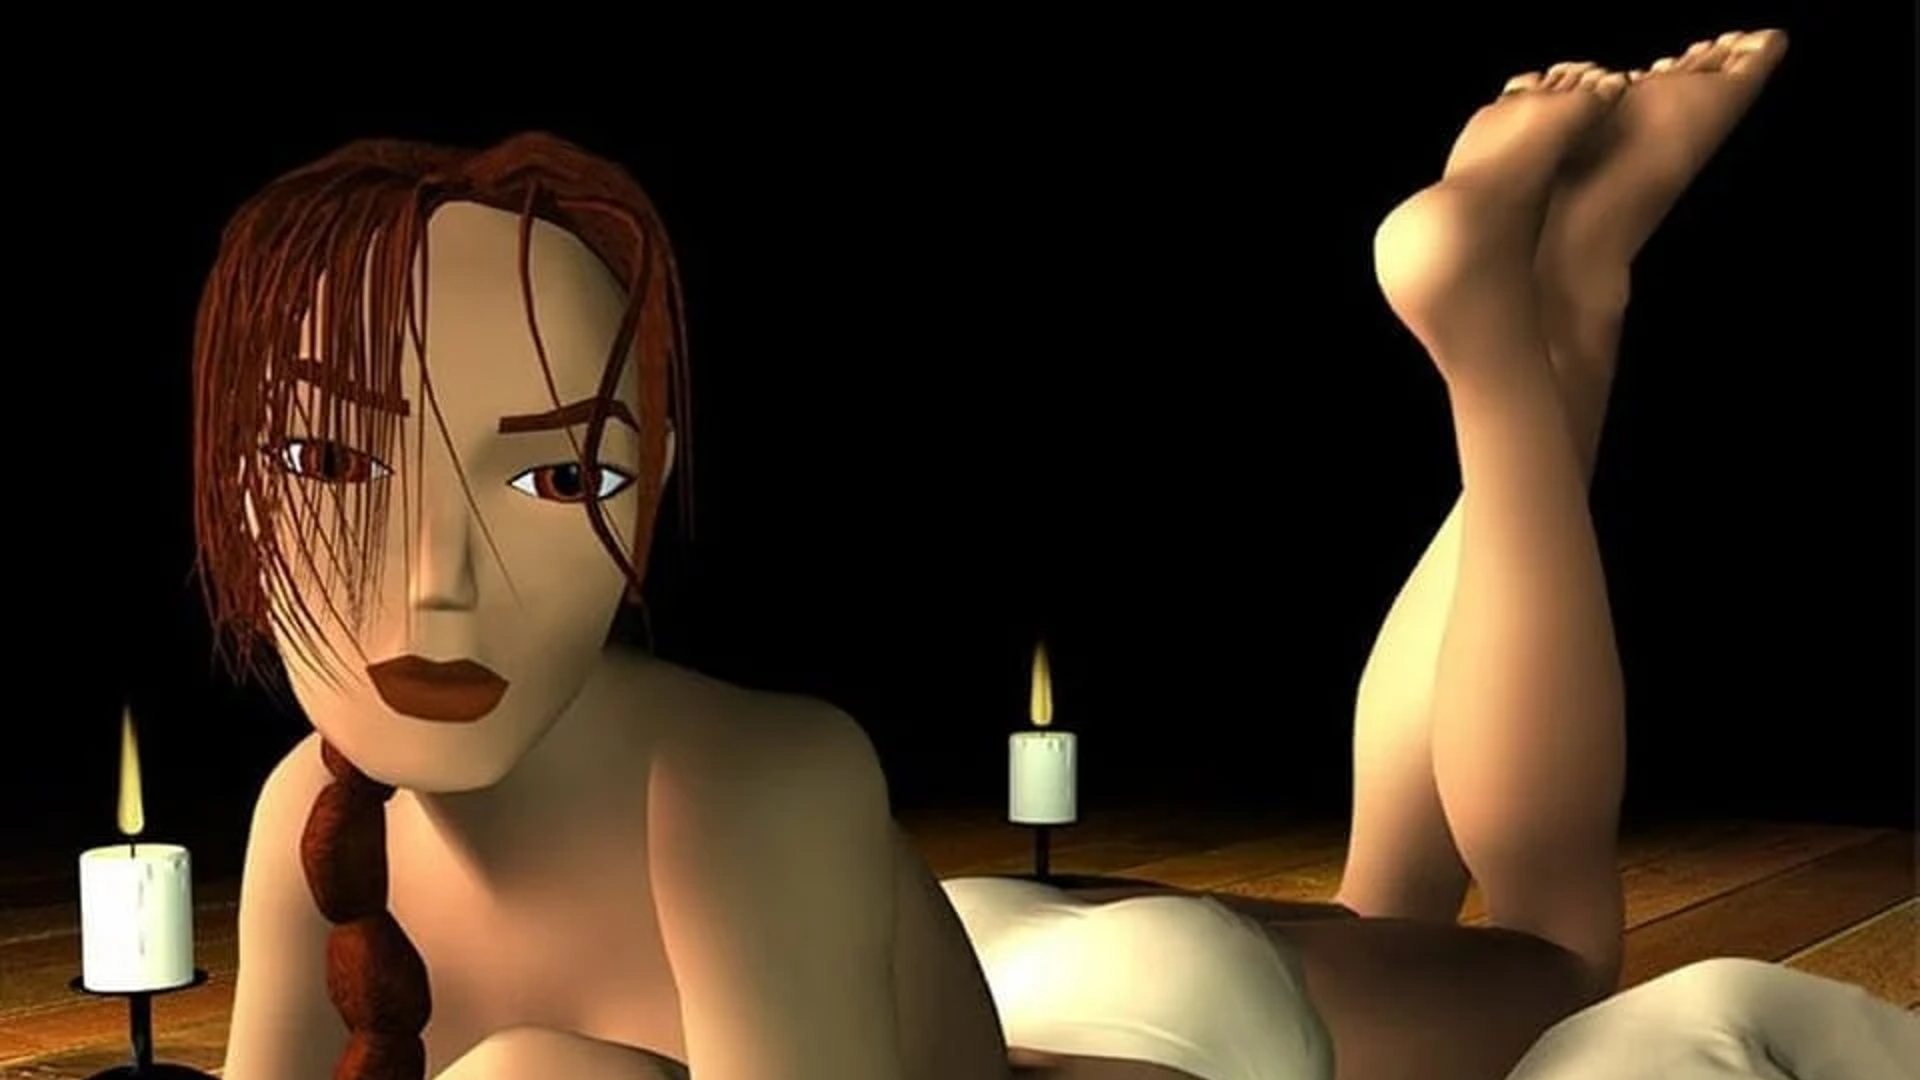 Lara Croft can be seen in underwear, laying down